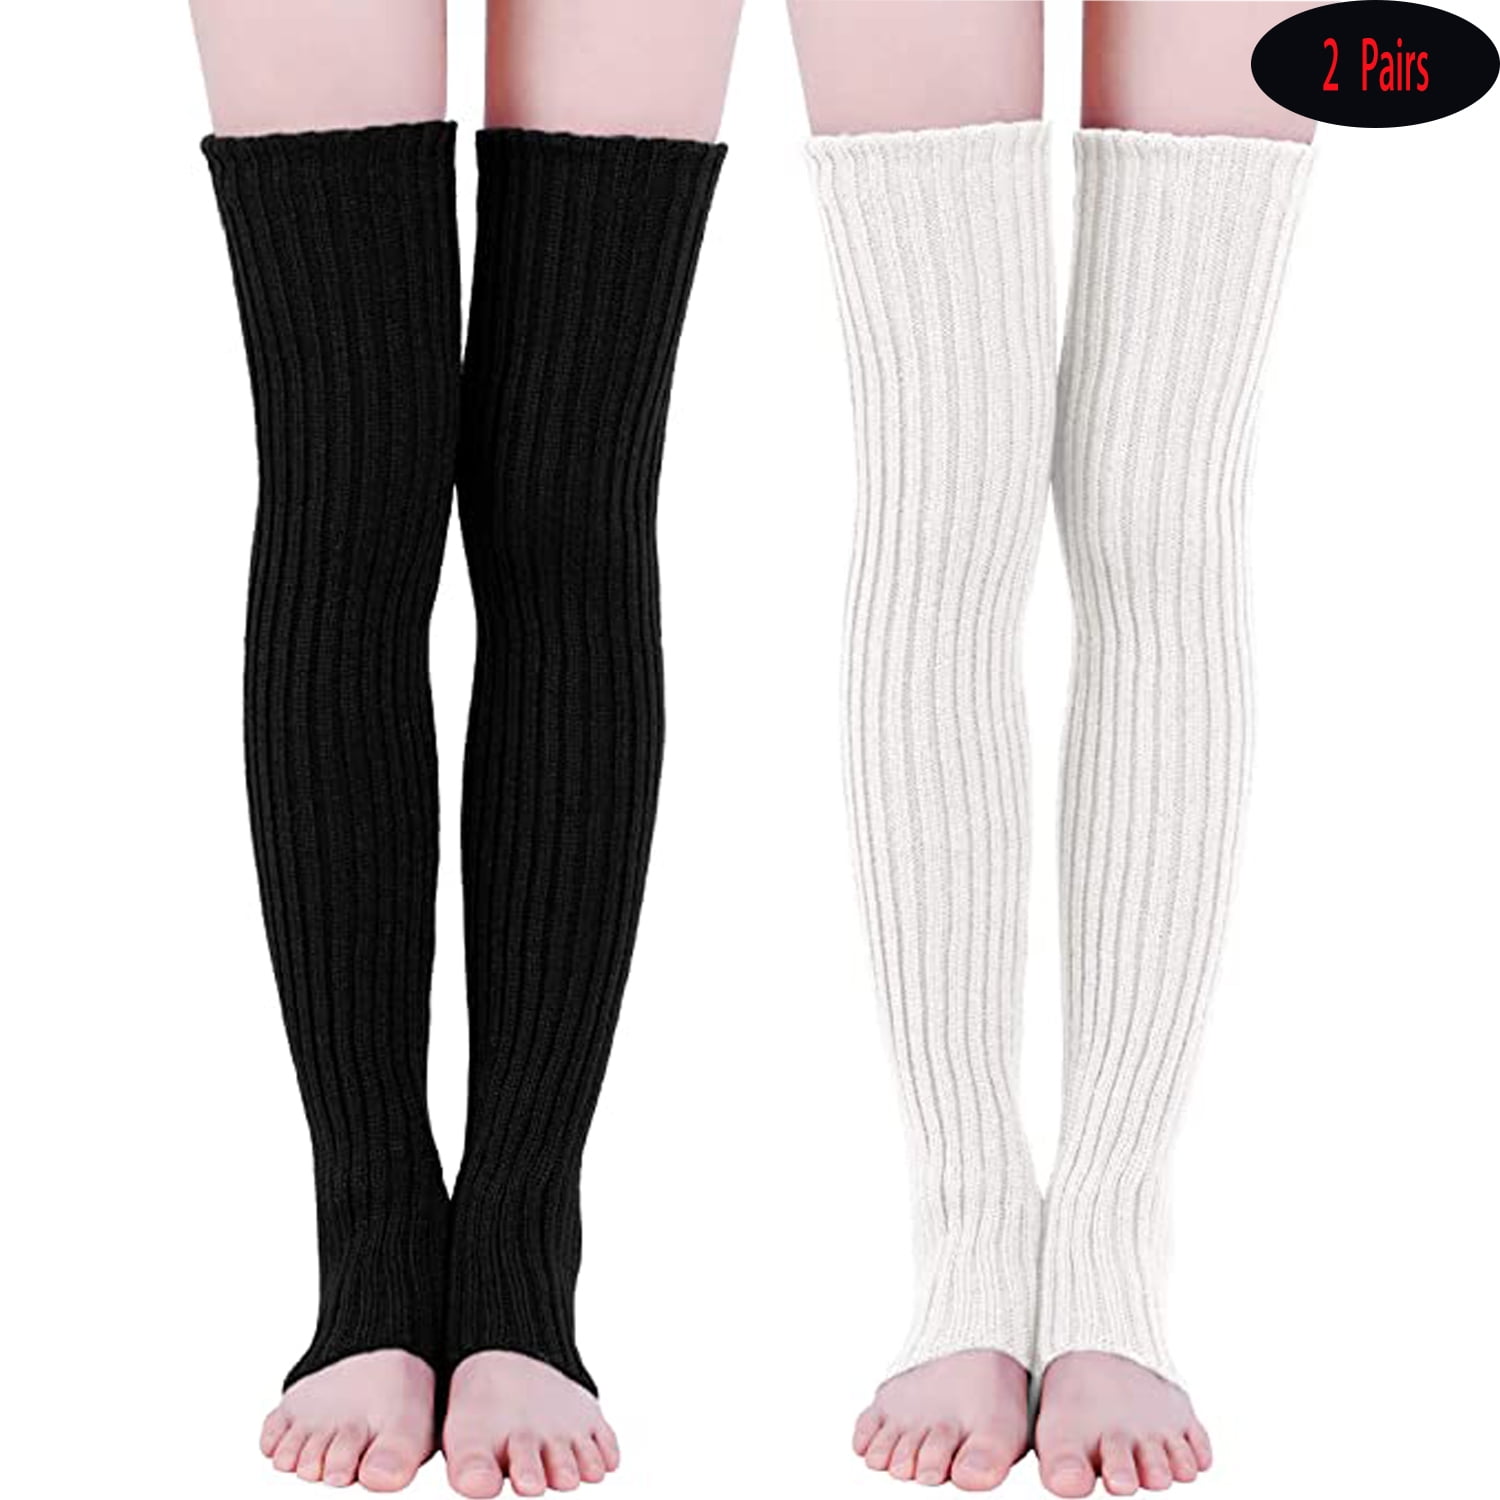 2 Pairs 31.5in Long Knit Leg Warmers over Knee Winter Leg Warmers High ...